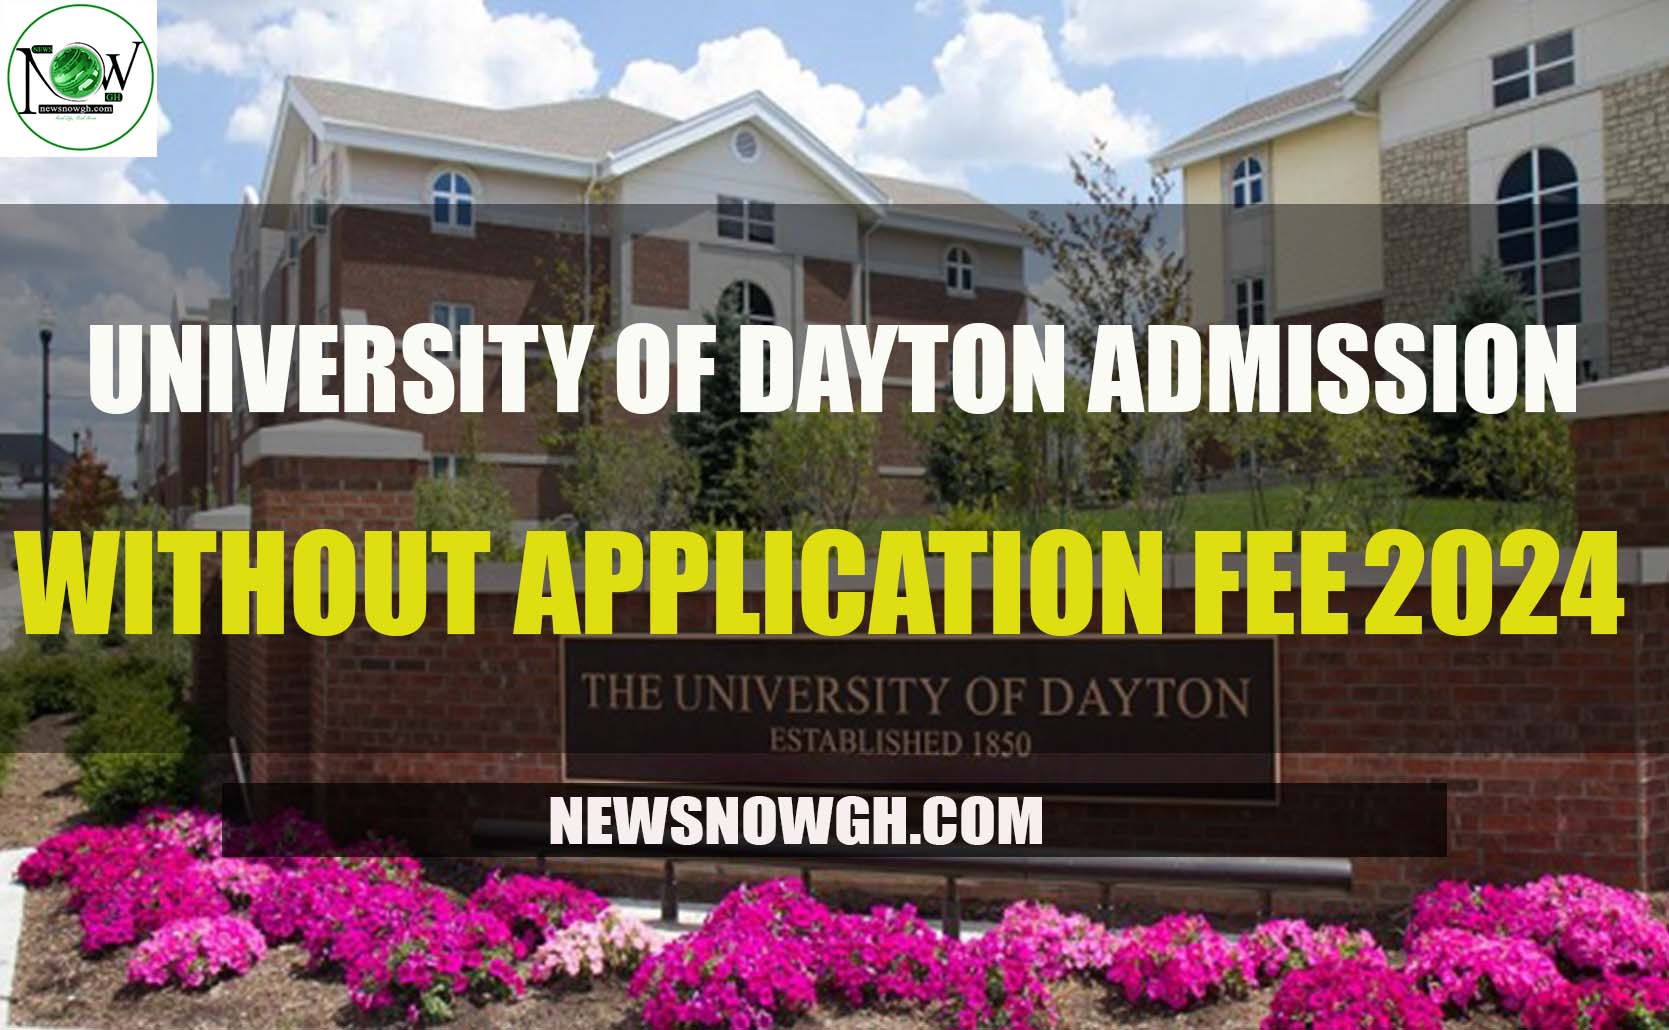 University of Dayton admissions without application fee for 202425